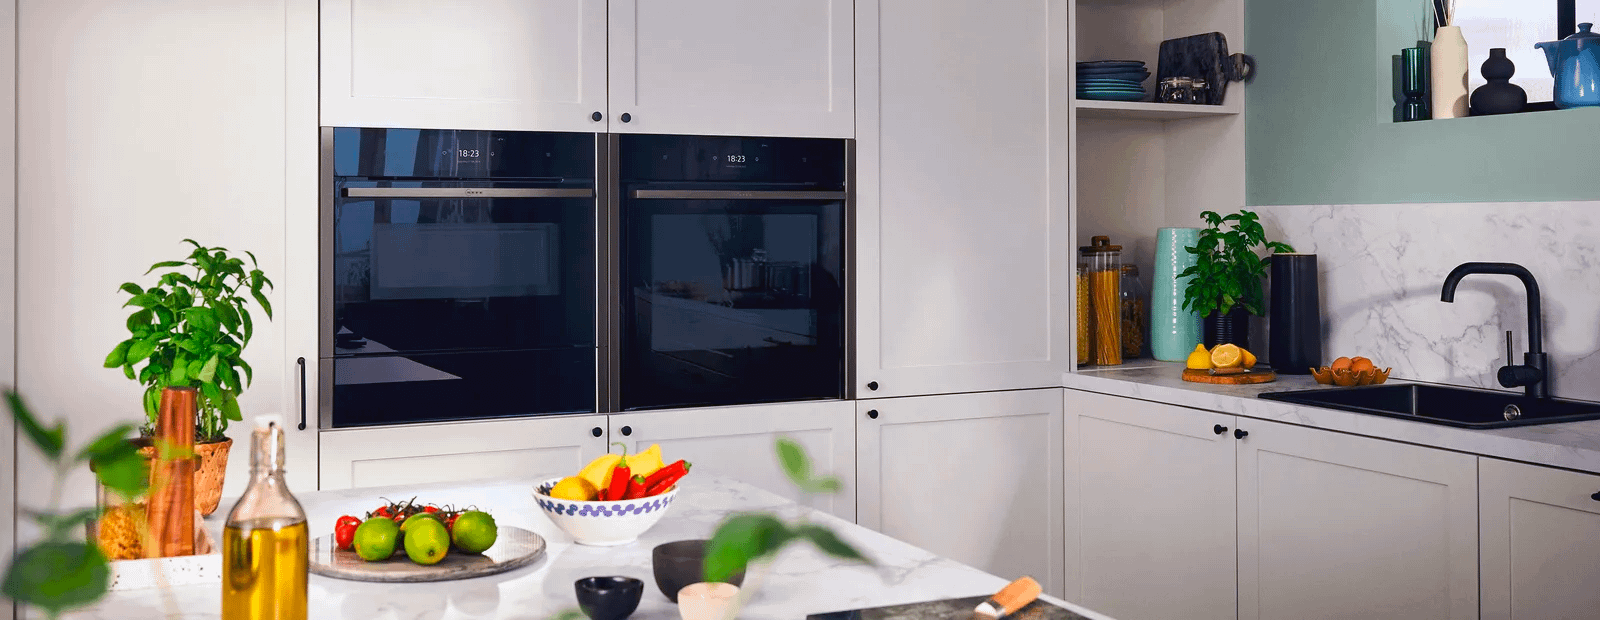 White kitchen with two built in Neff ovens, bright fruit and veg on the counters, and a black sink.